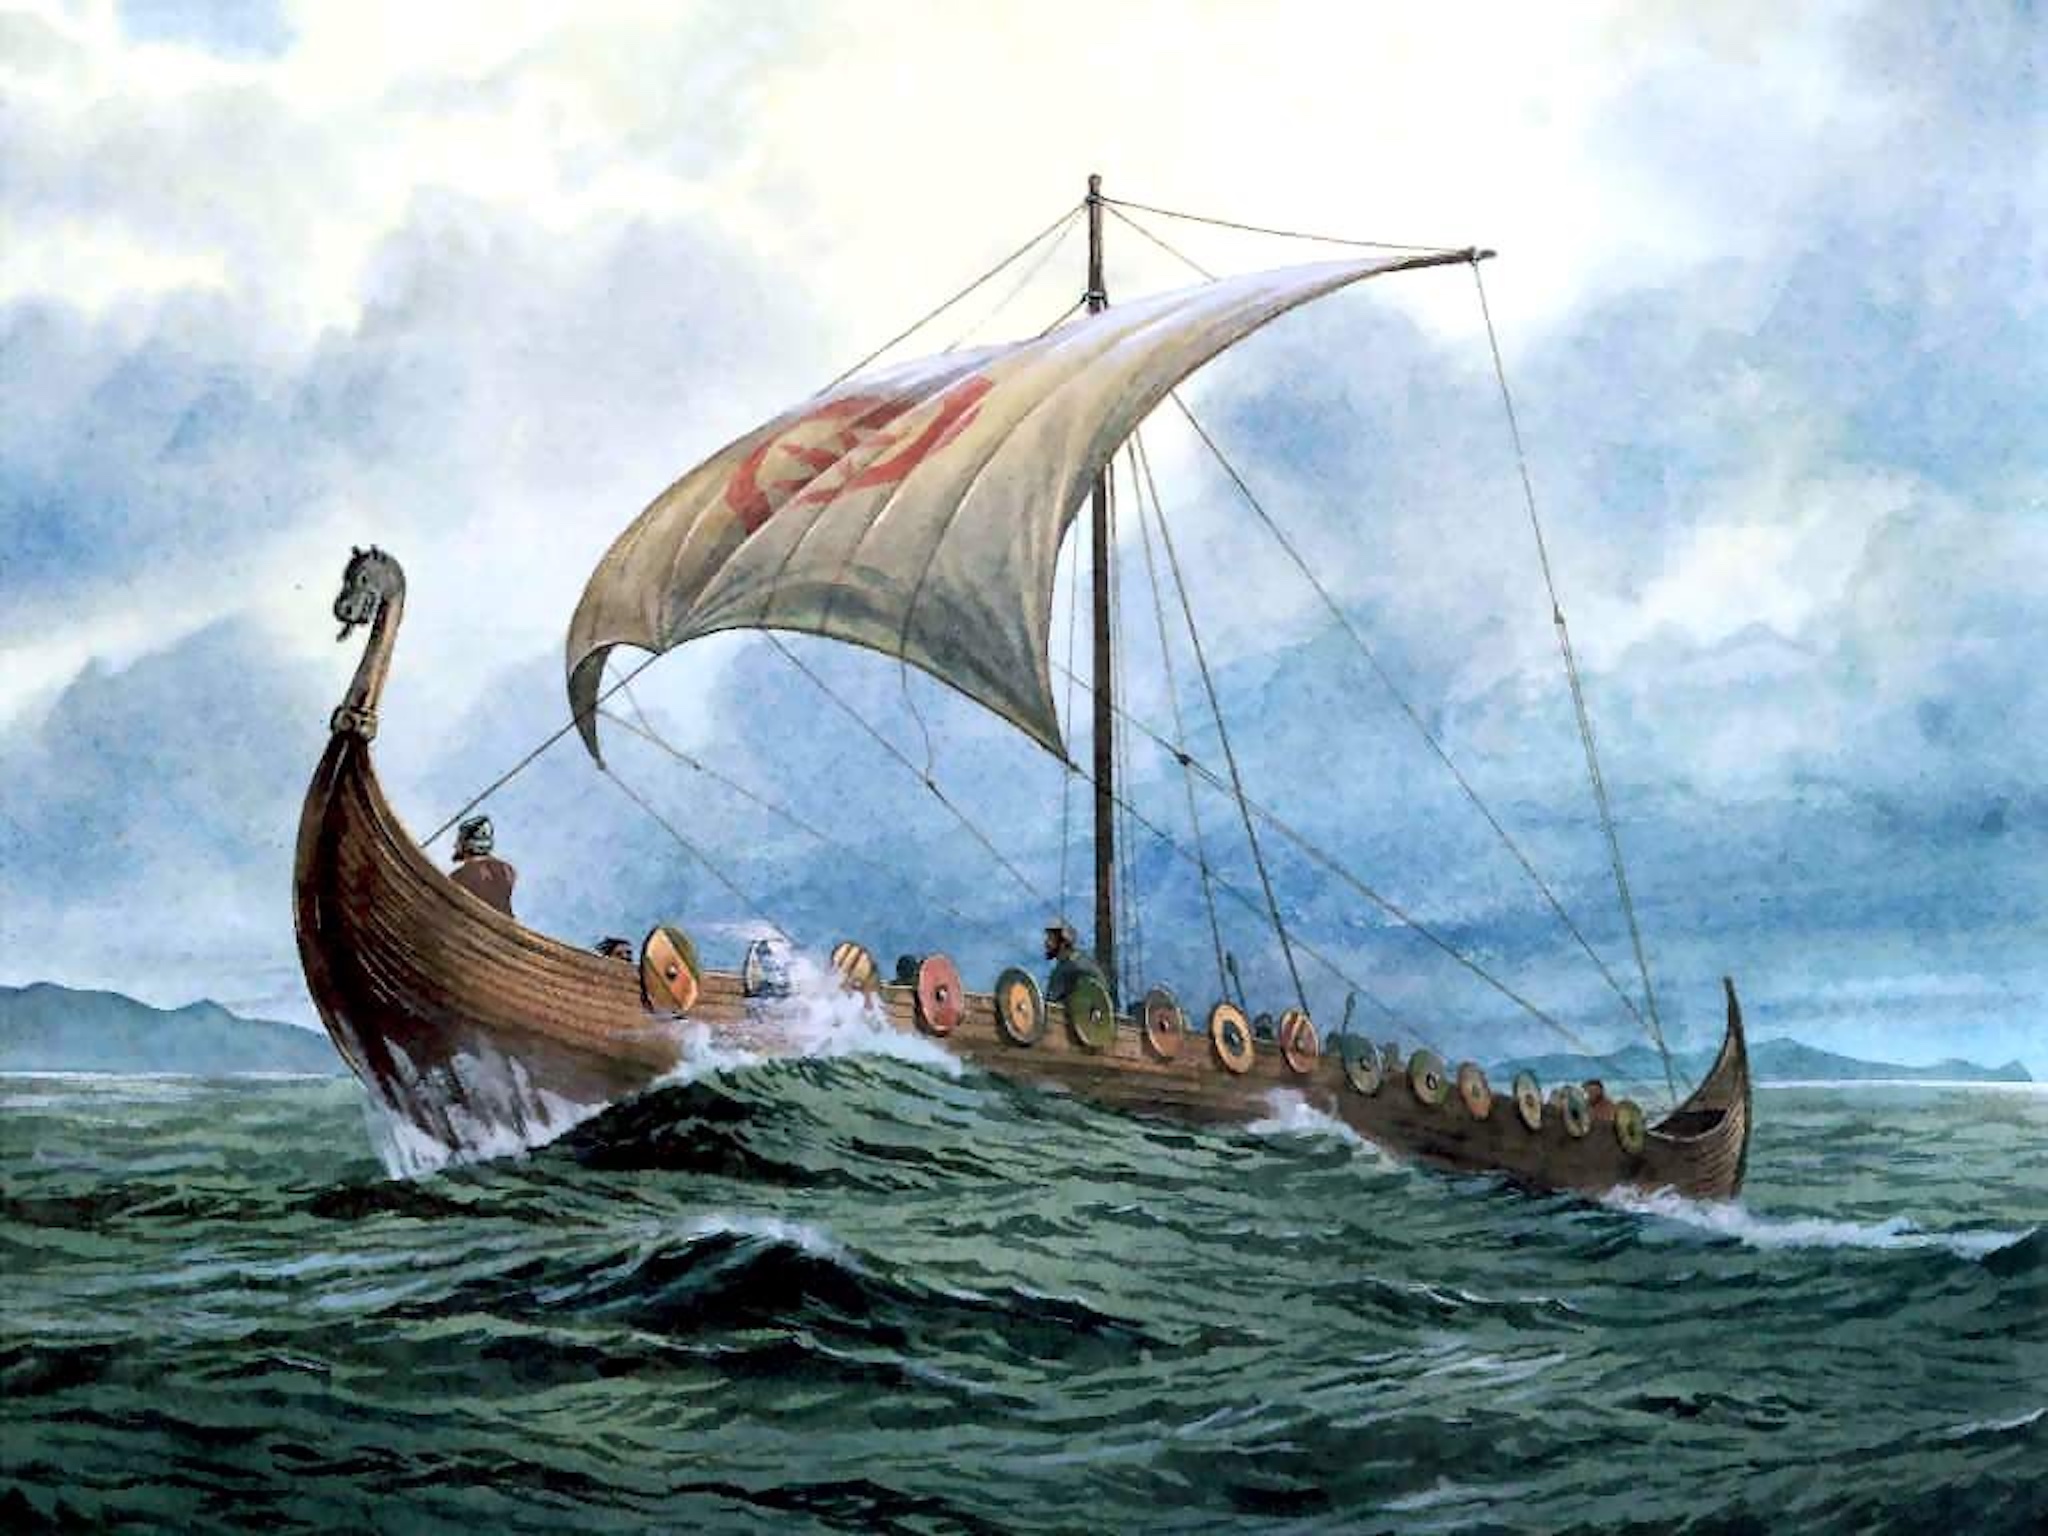 The Vikings explored the Americas nearly 500 years before Columbus